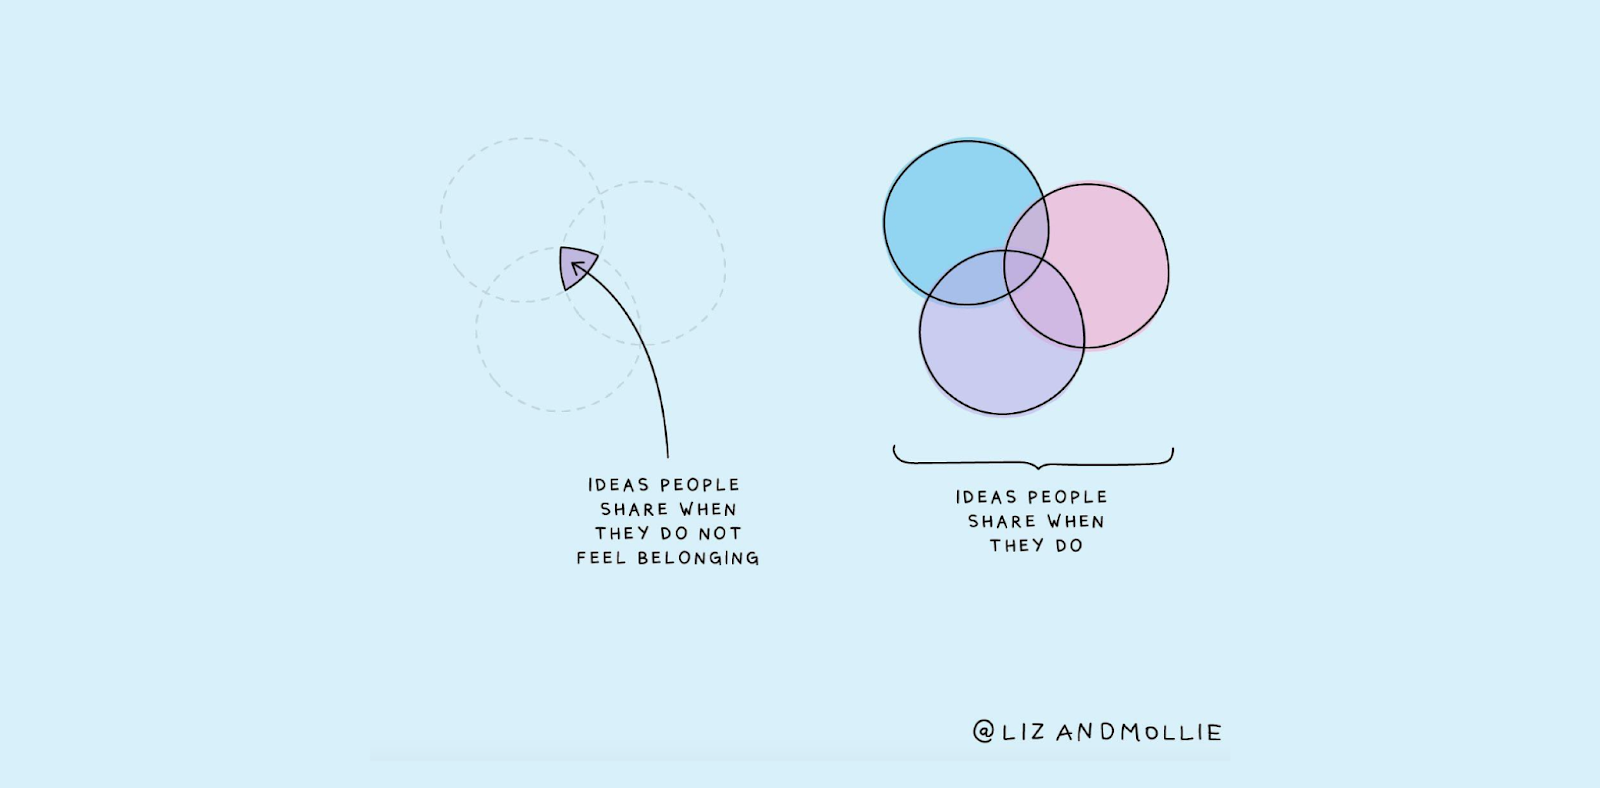 Two venn diagrams, one with a small shaded area representing the ideas people share when they don’t feel belonging and one with a large shaded area representing the ideas people share when they do.